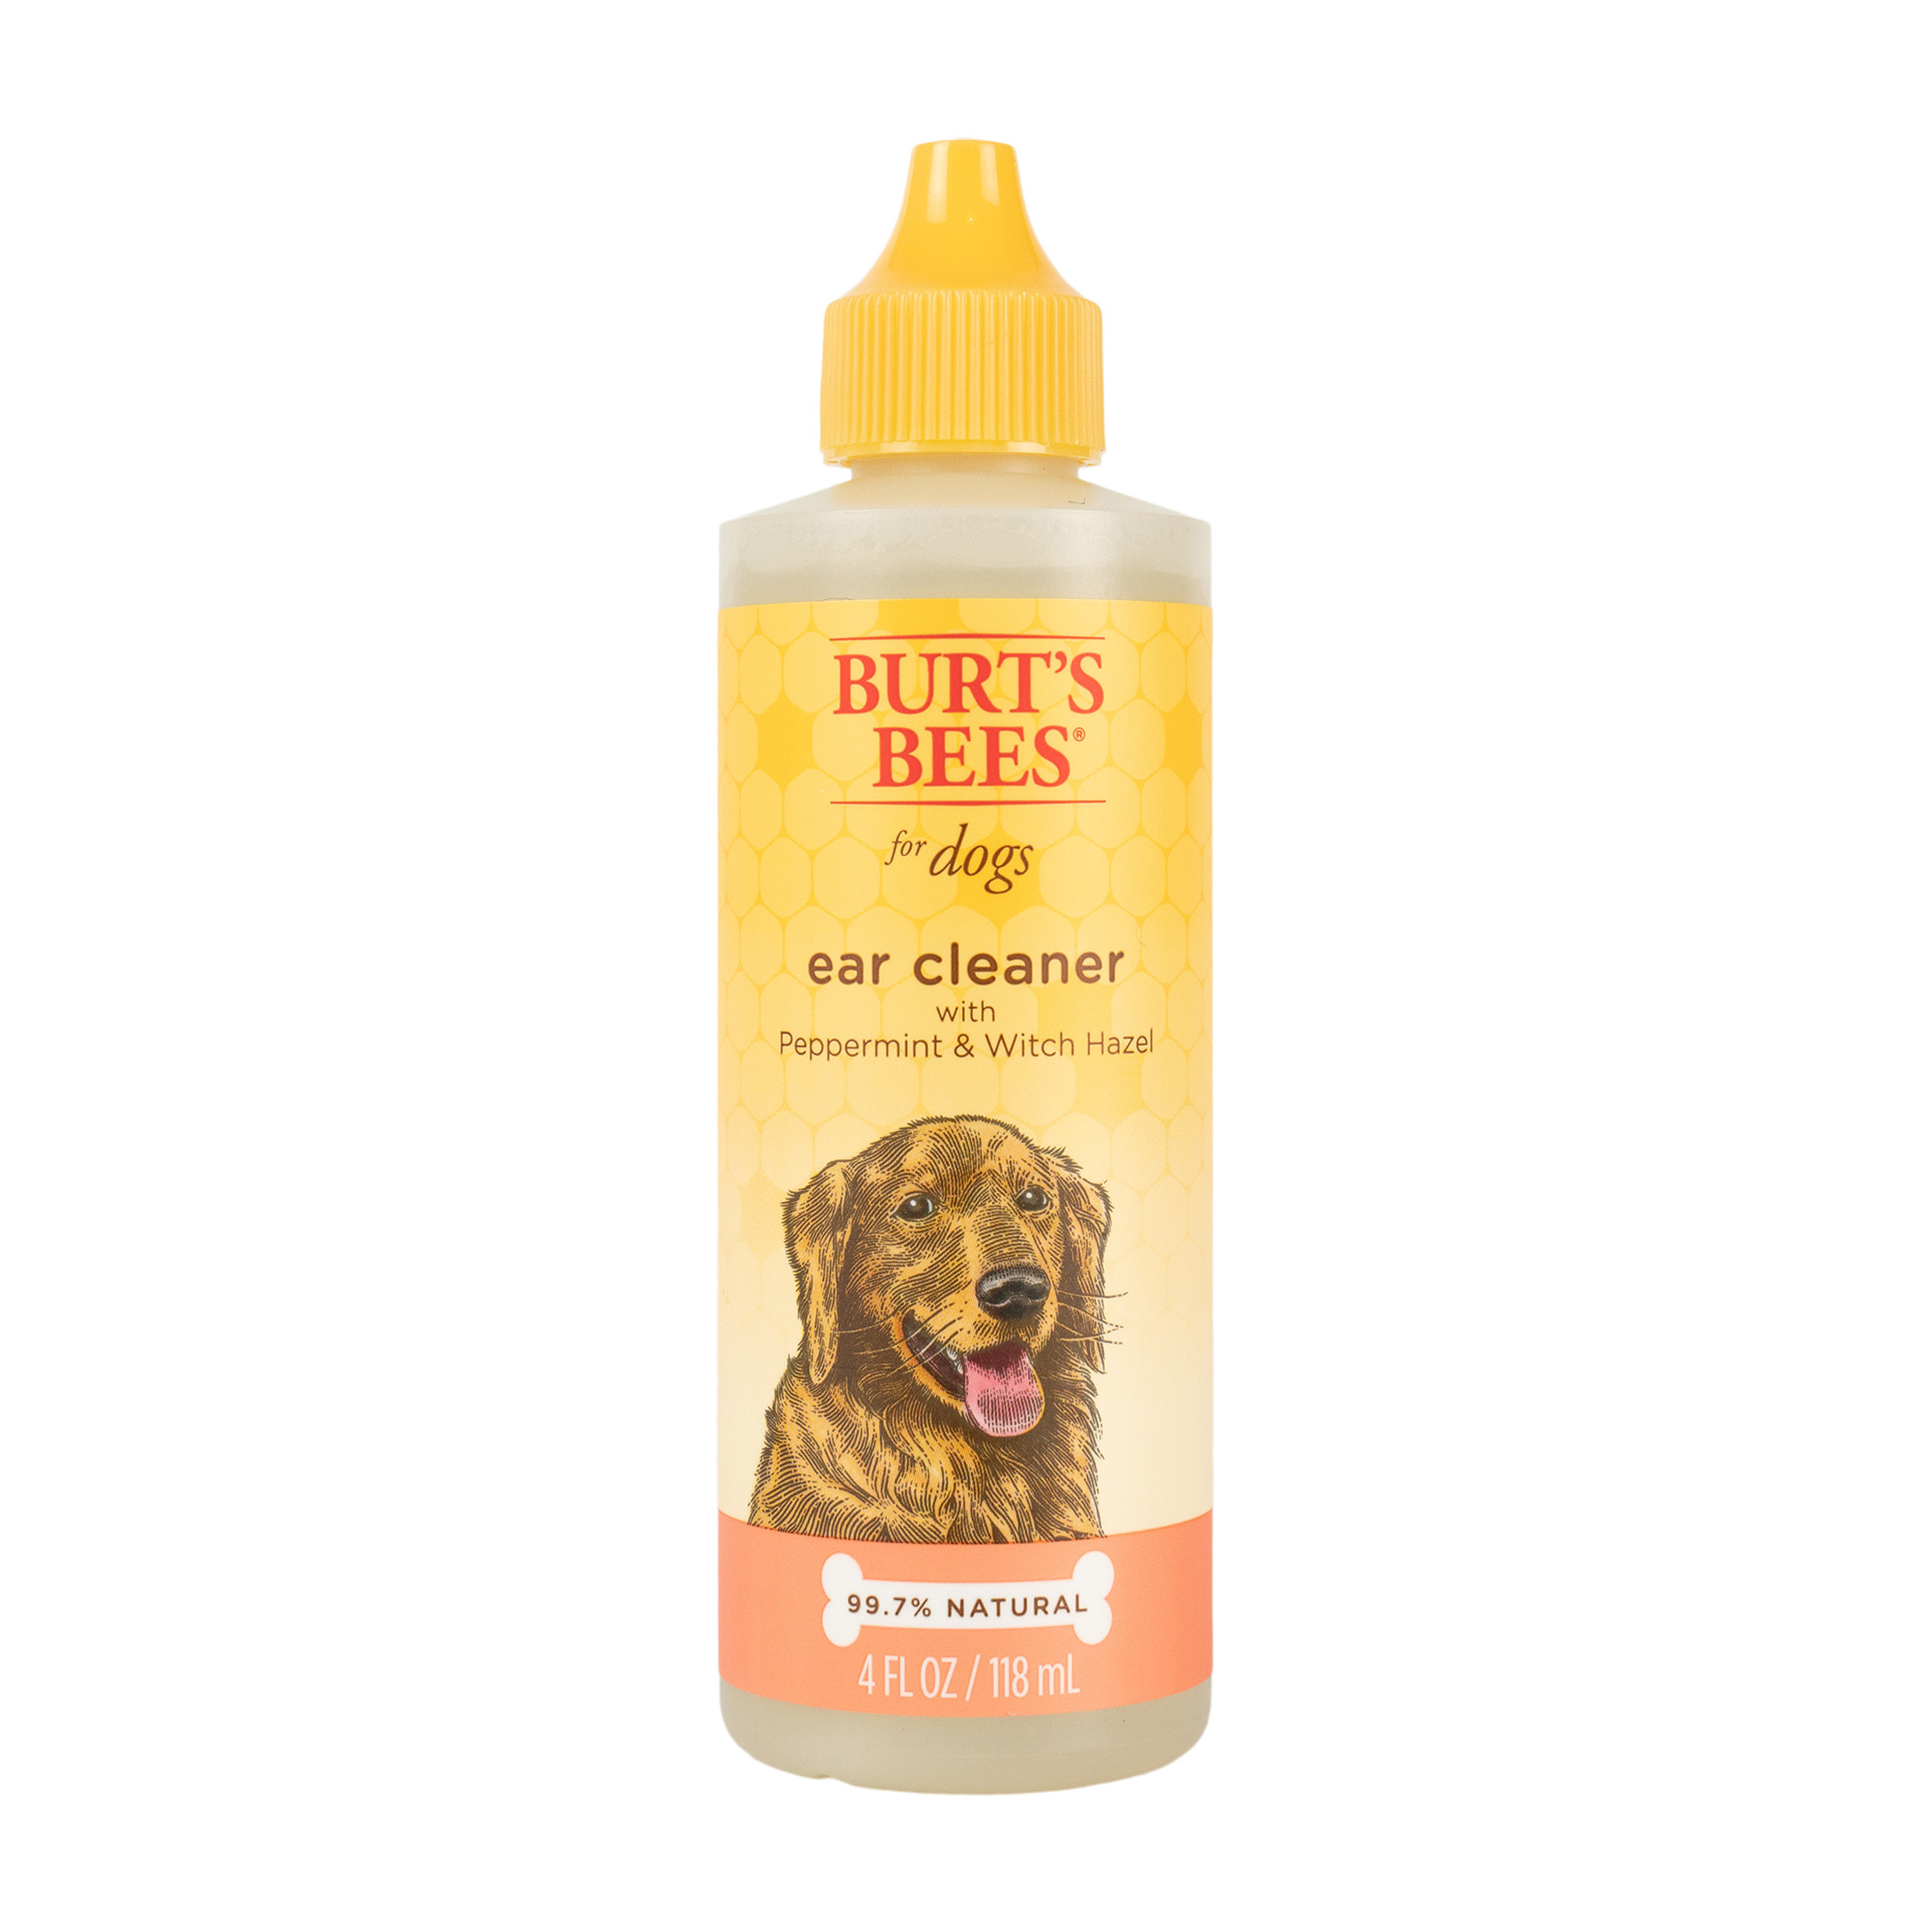 Burt's Bees Peppermint Ear Cleaner for Dogs, 4 Ounces - image 1 of 8